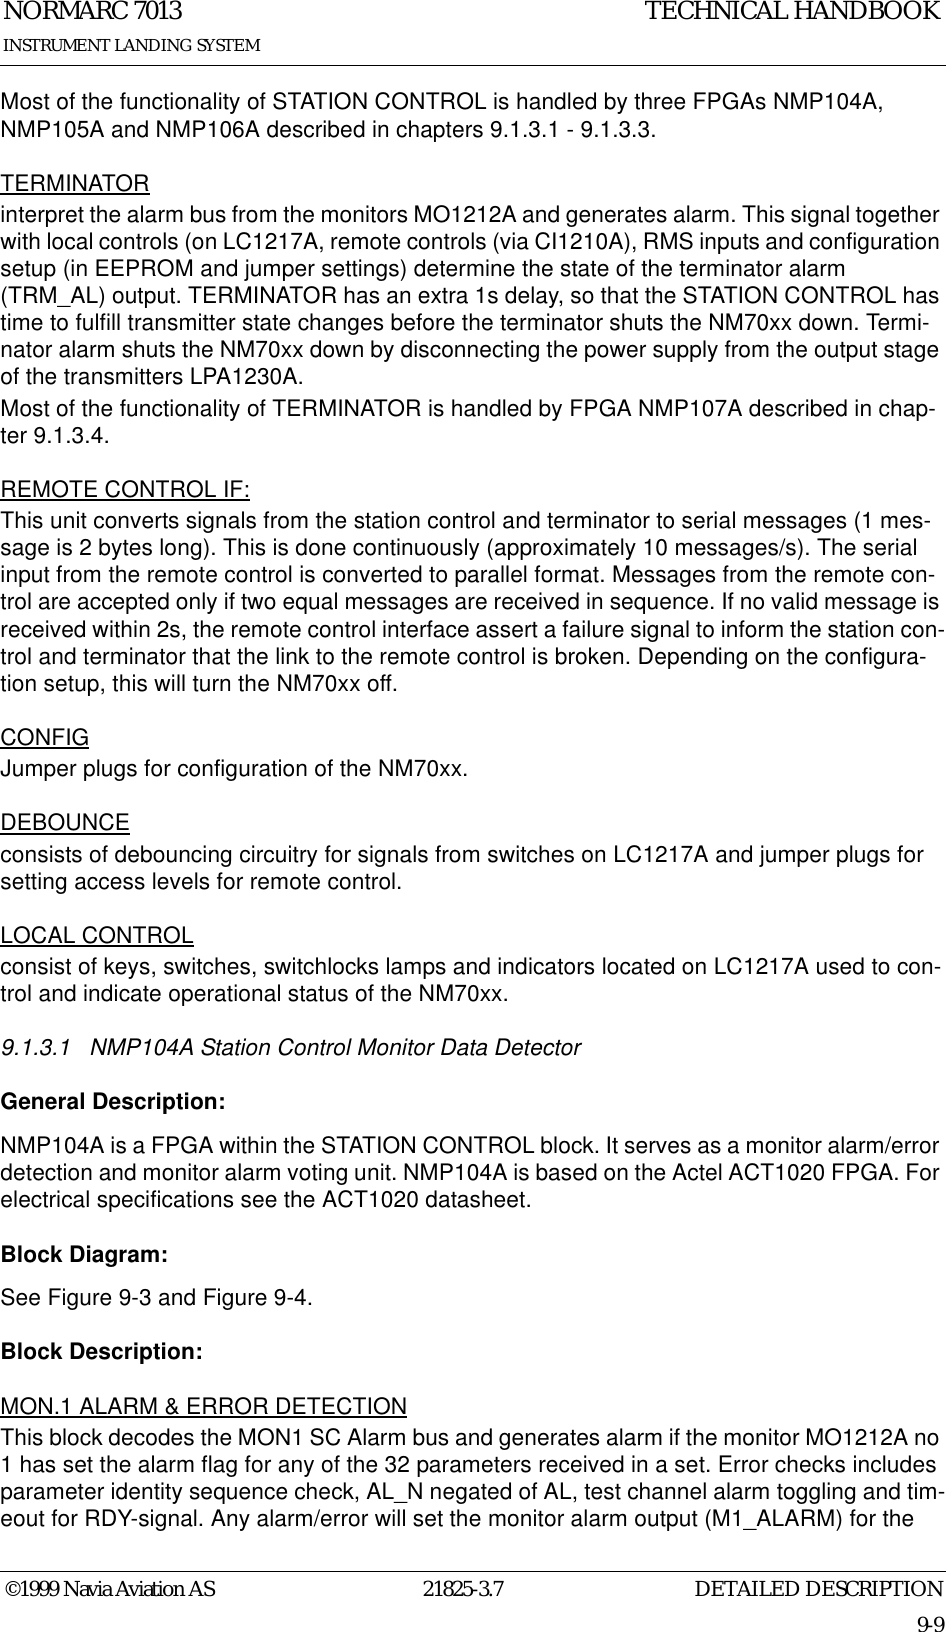 DETAILED DESCRIPTIONNORMARC 701321825-3.79-9INSTRUMENT LANDING SYSTEMTECHNICAL HANDBOOK©1999 Navia Aviation ASMost of the functionality of STATION CONTROL is handled by three FPGAs NMP104A, NMP105A and NMP106A described in chapters 9.1.3.1 - 9.1.3.3.TERMINATORinterpret the alarm bus from the monitors MO1212A and generates alarm. This signal together with local controls (on LC1217A, remote controls (via CI1210A), RMS inputs and configuration setup (in EEPROM and jumper settings) determine the state of the terminator alarm (TRM_AL) output. TERMINATOR has an extra 1s delay, so that the STATION CONTROL has time to fulfill transmitter state changes before the terminator shuts the NM70xx down. Termi-nator alarm shuts the NM70xx down by disconnecting the power supply from the output stage of the transmitters LPA1230A.Most of the functionality of TERMINATOR is handled by FPGA NMP107A described in chap-ter 9.1.3.4.REMOTE CONTROL IF:This unit converts signals from the station control and terminator to serial messages (1 mes-sage is 2 bytes long). This is done continuously (approximately 10 messages/s). The serial input from the remote control is converted to parallel format. Messages from the remote con-trol are accepted only if two equal messages are received in sequence. If no valid message is received within 2s, the remote control interface assert a failure signal to inform the station con-trol and terminator that the link to the remote control is broken. Depending on the configura-tion setup, this will turn the NM70xx off.CONFIGJumper plugs for configuration of the NM70xx.DEBOUNCEconsists of debouncing circuitry for signals from switches on LC1217A and jumper plugs for setting access levels for remote control.LOCAL CONTROLconsist of keys, switches, switchlocks lamps and indicators located on LC1217A used to con-trol and indicate operational status of the NM70xx.9.1.3.1 NMP104A Station Control Monitor Data DetectorGeneral Description:NMP104A is a FPGA within the STATION CONTROL block. It serves as a monitor alarm/error detection and monitor alarm voting unit. NMP104A is based on the Actel ACT1020 FPGA. For electrical specifications see the ACT1020 datasheet.Block Diagram:See Figure 9-3 and Figure 9-4.Block Description:MON.1 ALARM &amp; ERROR DETECTIONThis block decodes the MON1 SC Alarm bus and generates alarm if the monitor MO1212A no 1 has set the alarm flag for any of the 32 parameters received in a set. Error checks includes parameter identity sequence check, AL_N negated of AL, test channel alarm toggling and tim-eout for RDY-signal. Any alarm/error will set the monitor alarm output (M1_ALARM) for the 